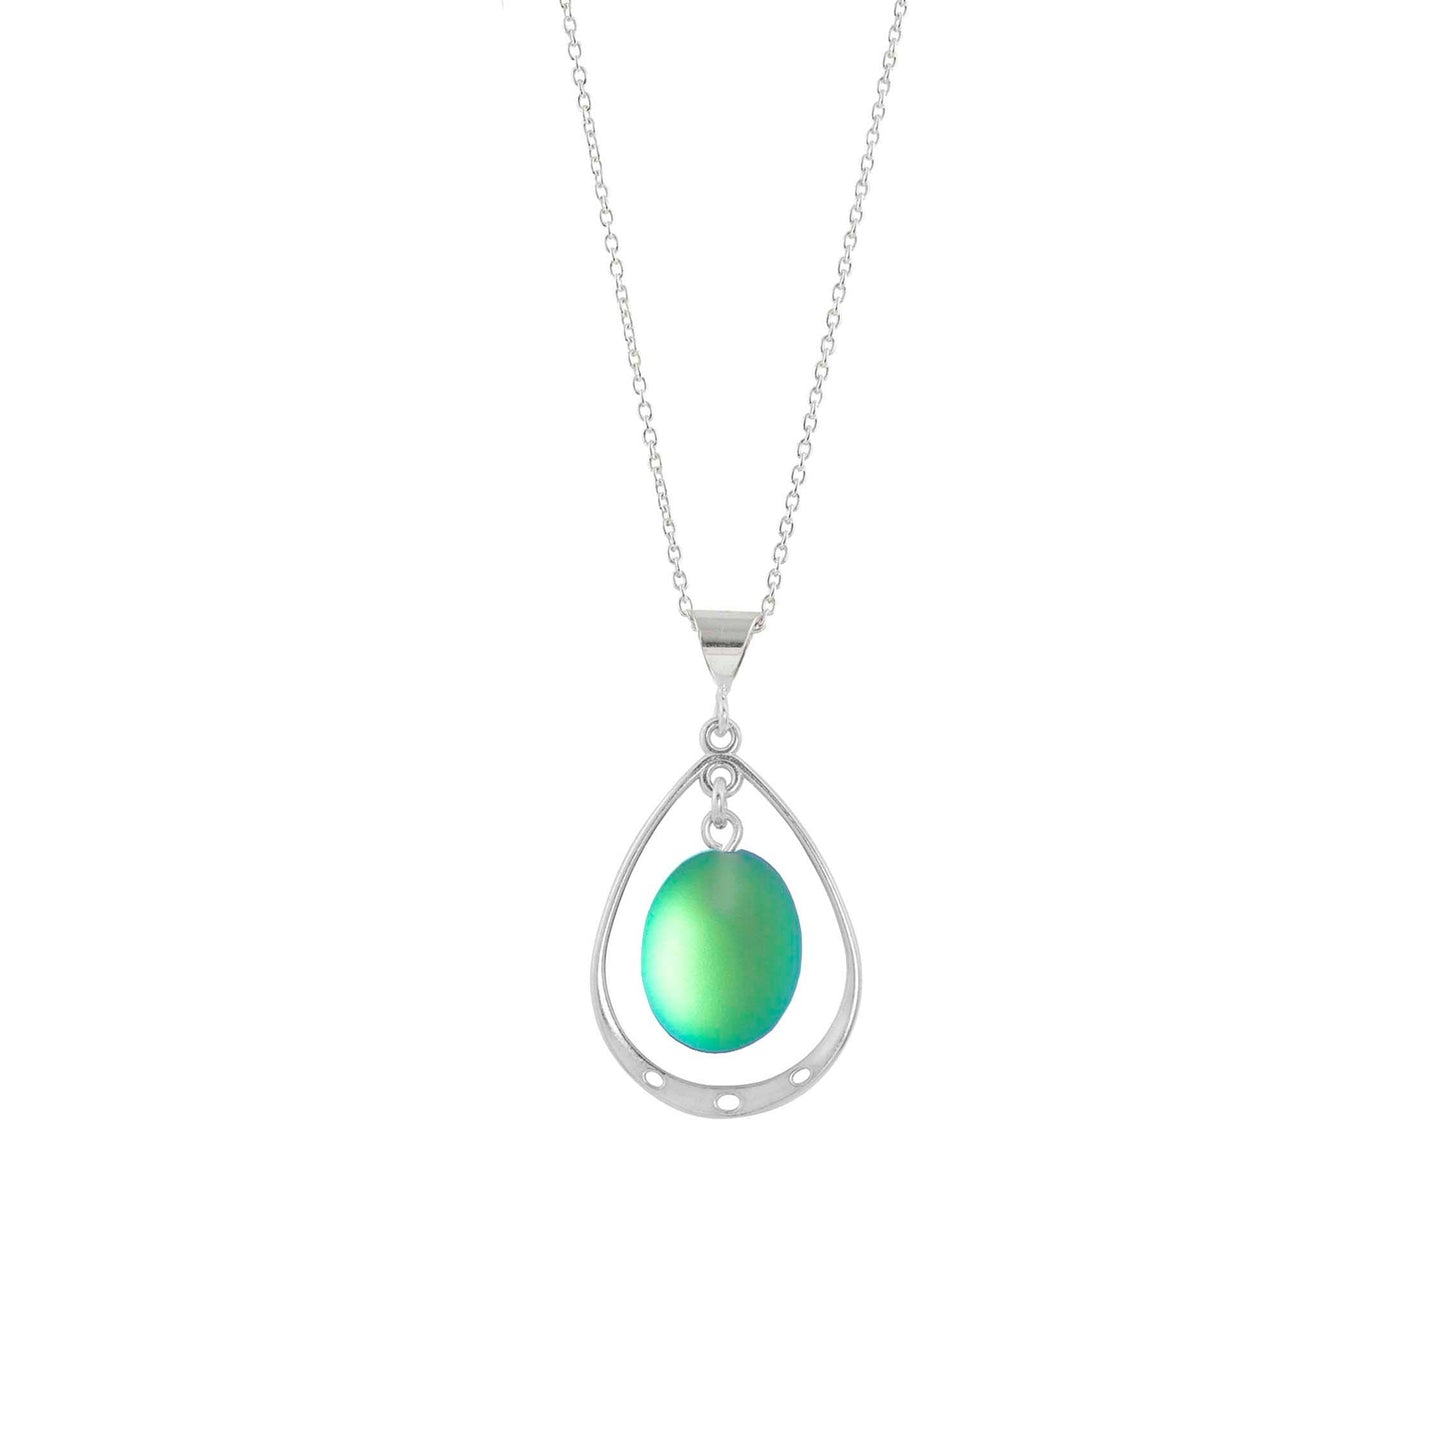 Oval Crystal with Sterling Silver Loop Pendant - Green